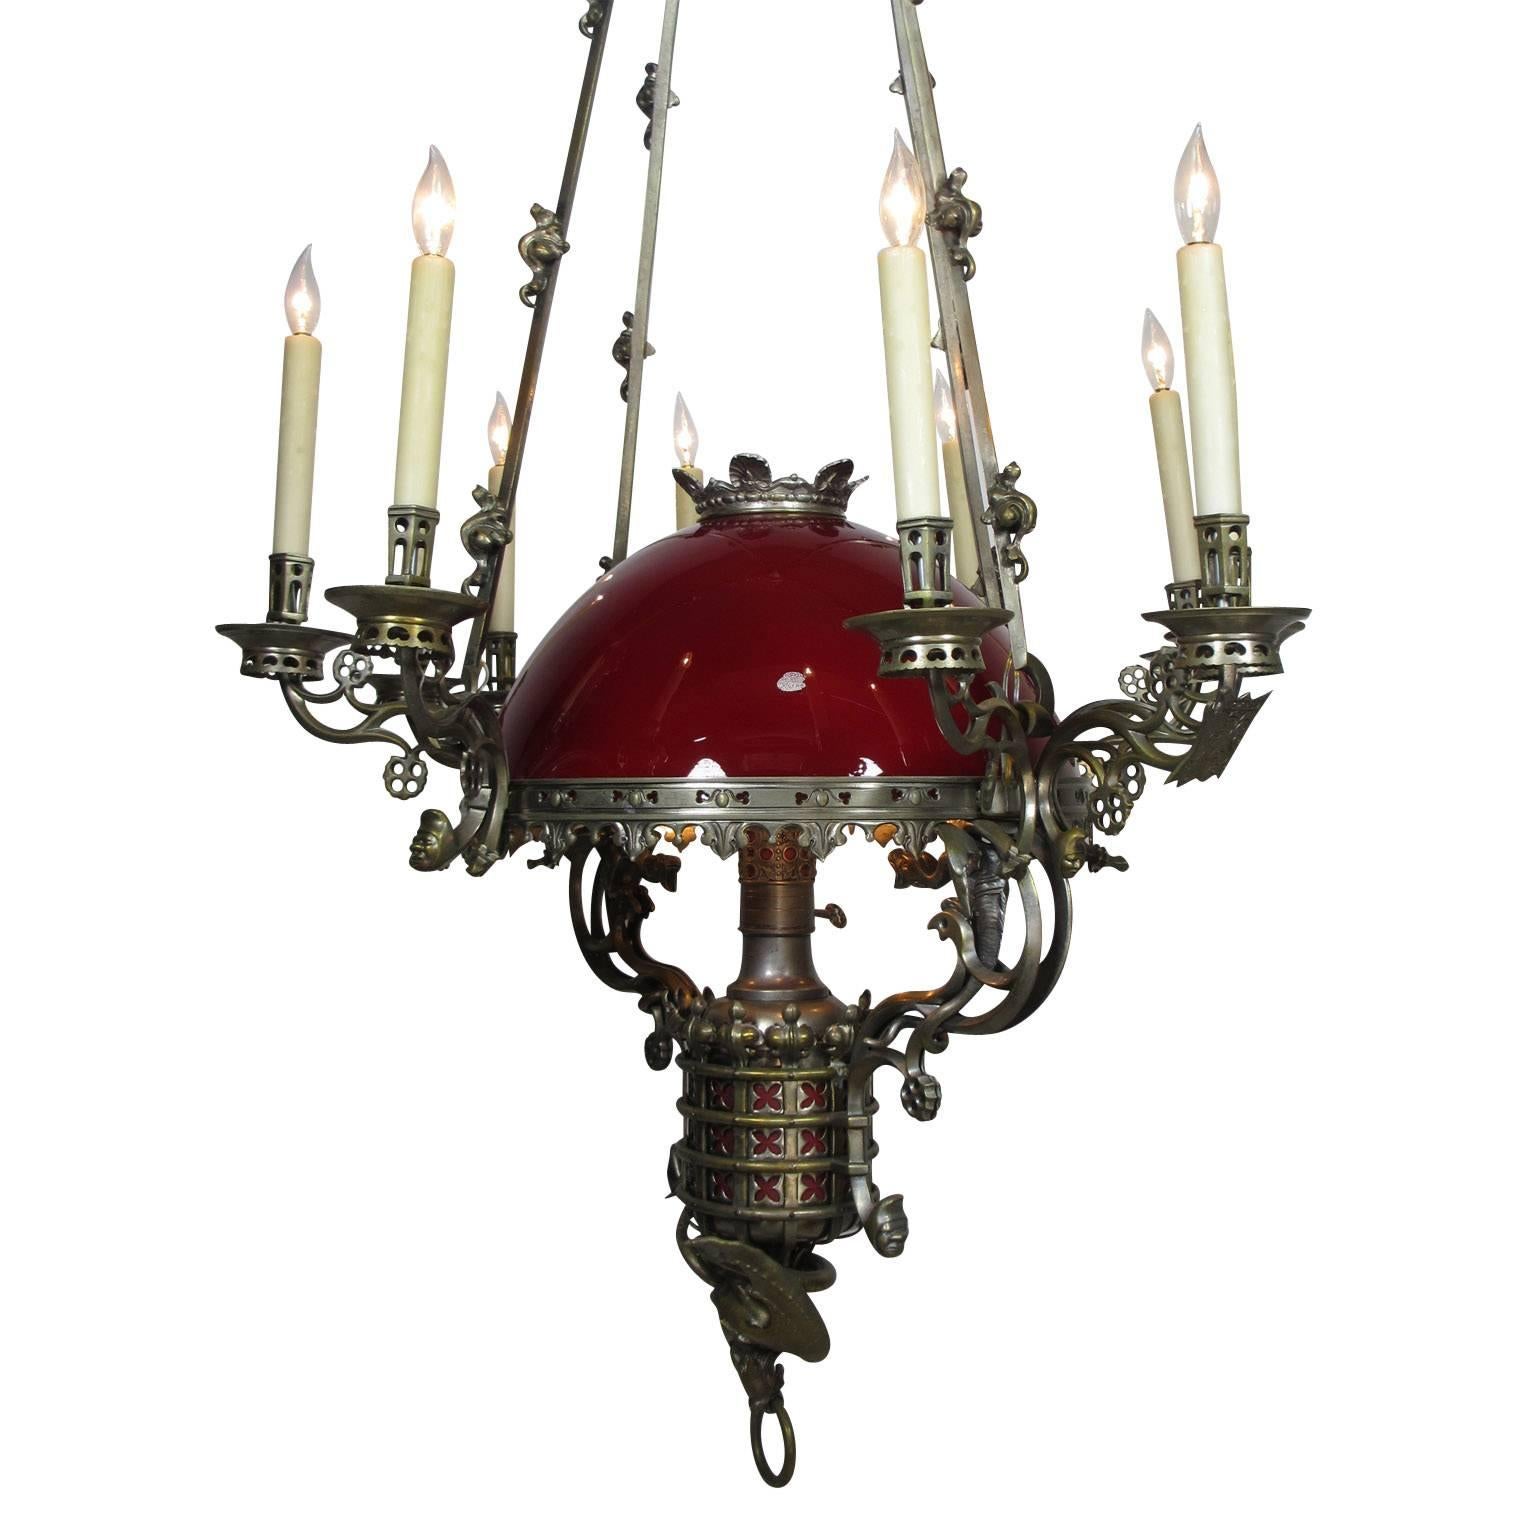 A fine and large Anglo-French 19th-20th century Gothic-revival figural silvered bronze fourteen-light oil and candle chandelier (now electrified). The elongated bronze frame crowned with its original ruby-red blown glass dome above a rim surmounted